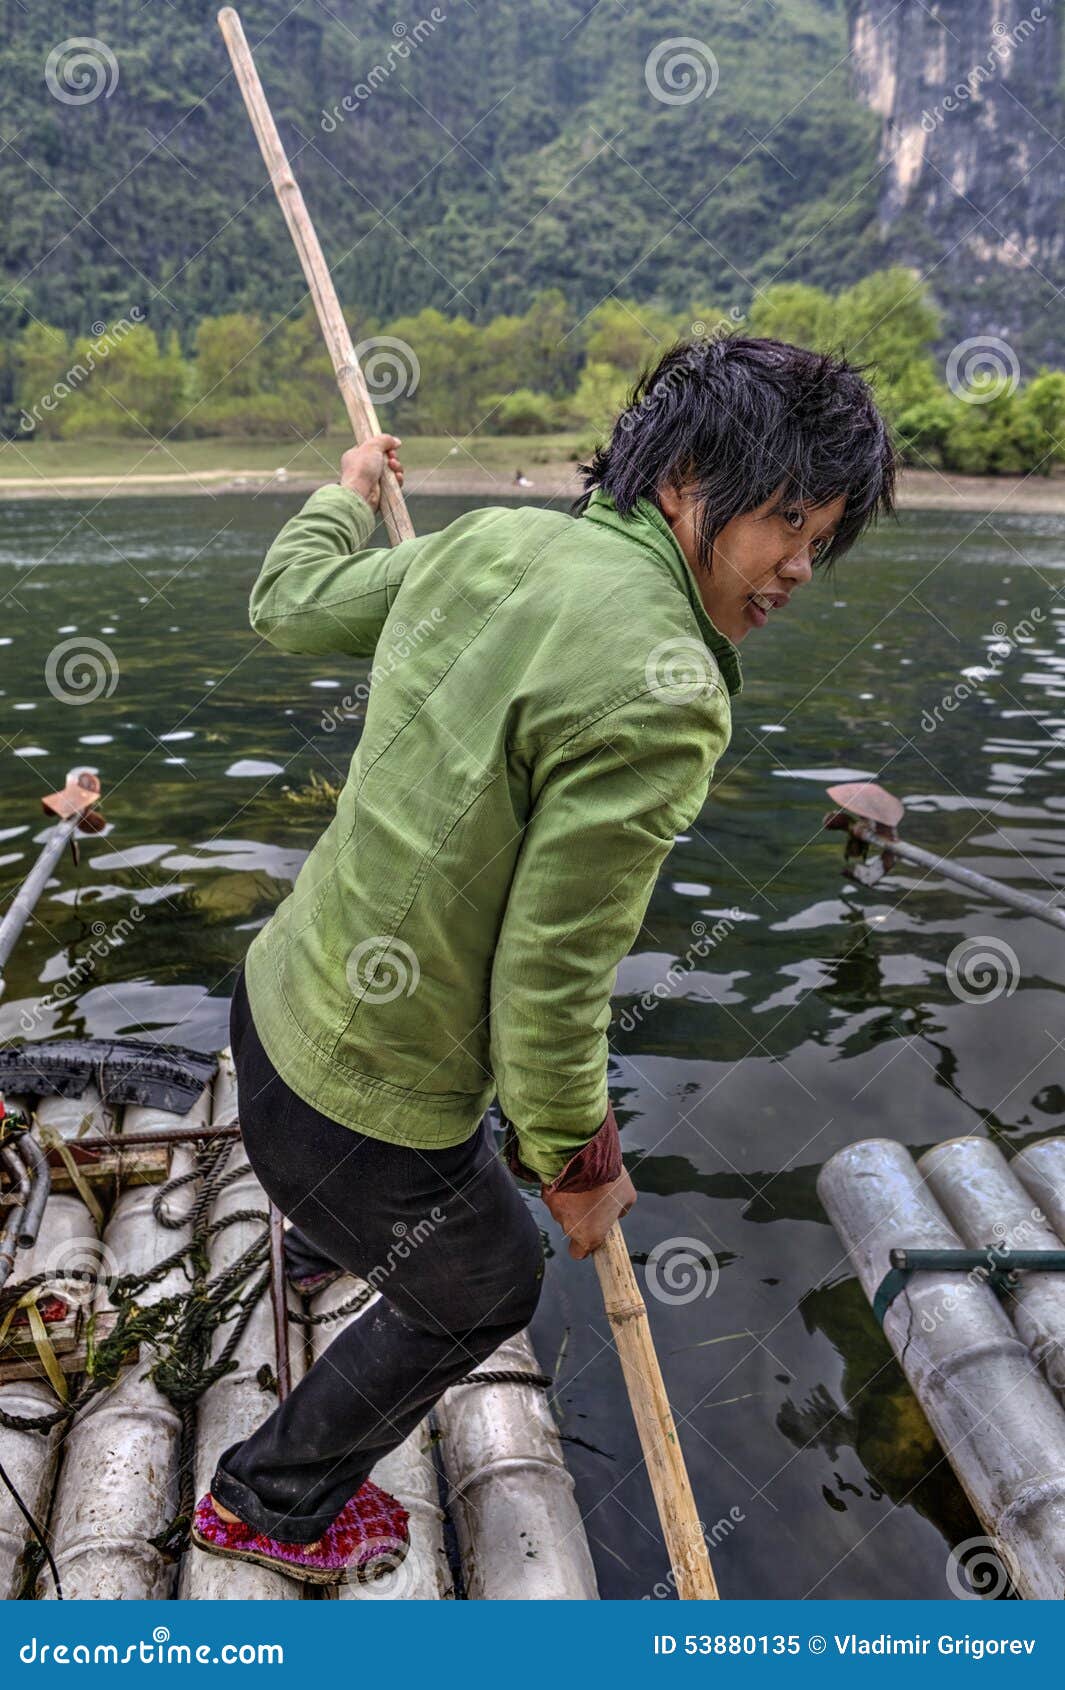 Girl Ferryman Crosses River on Bamboo Raft in Guilin, China Editorial Image  - Image of bucolic, passage: 53880135